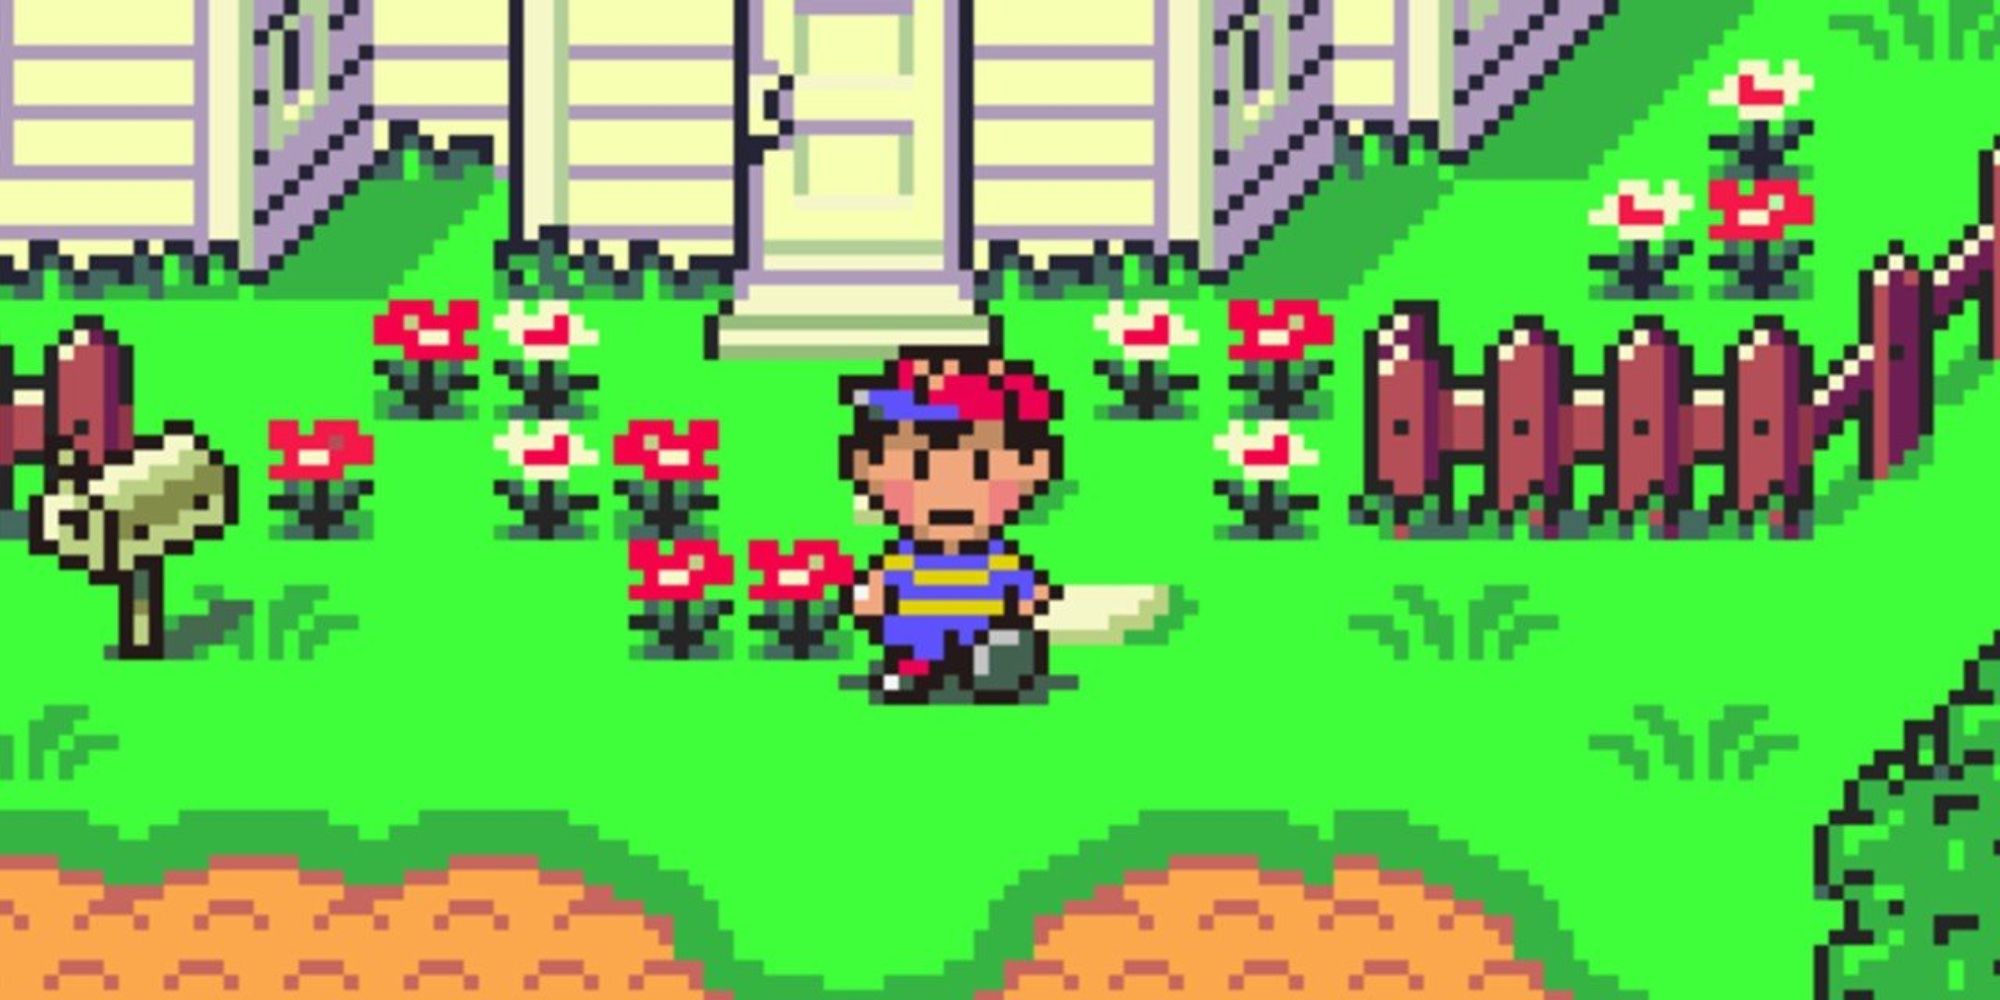 of being earthbound in front of a house surrounded by flowers